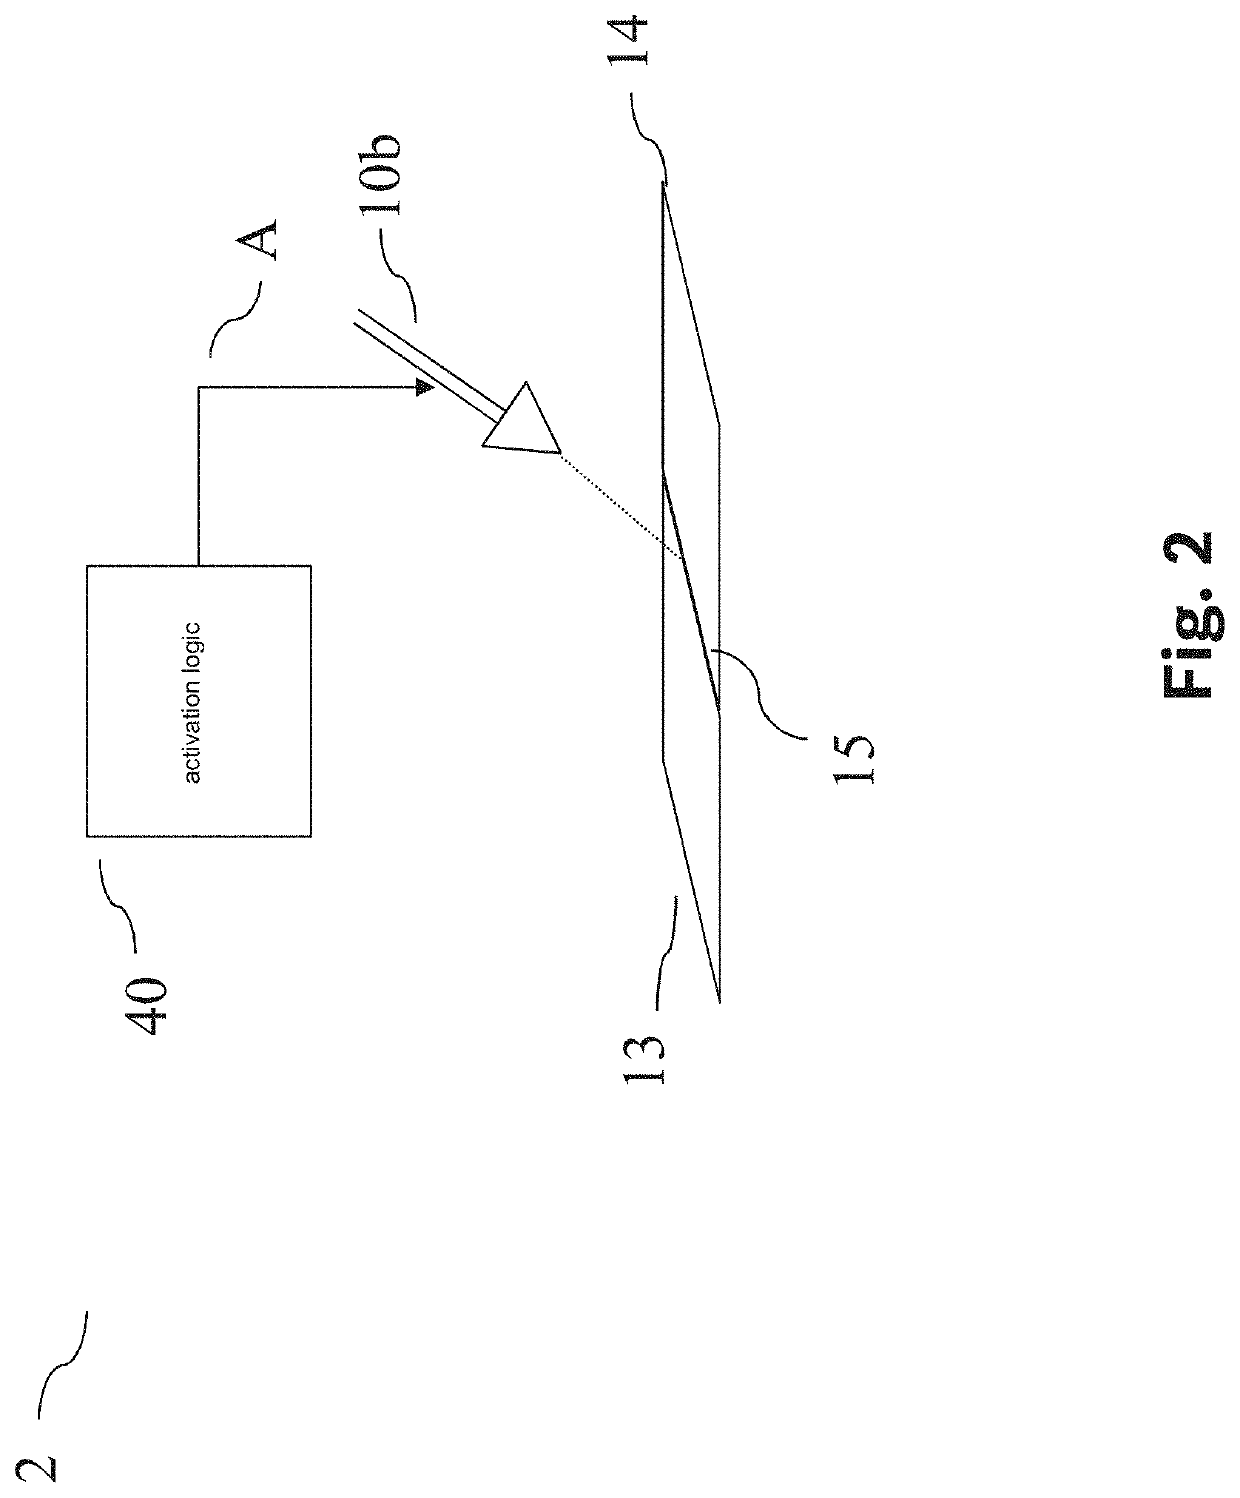 Method and device for setting operating parameters of a physical system